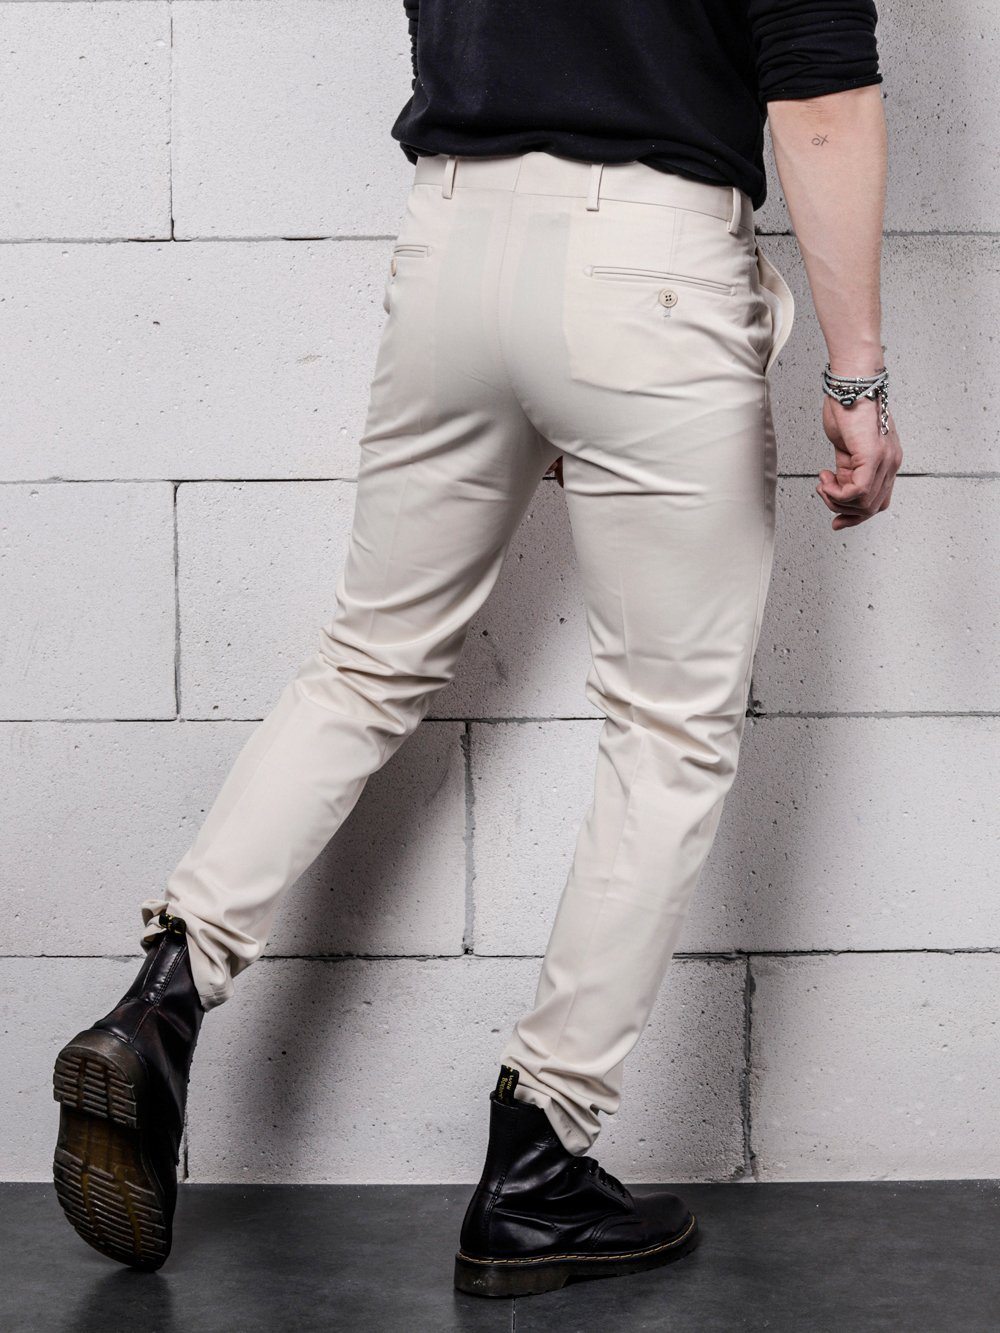 A man is standing against a brick wall wearing vanilla pants.